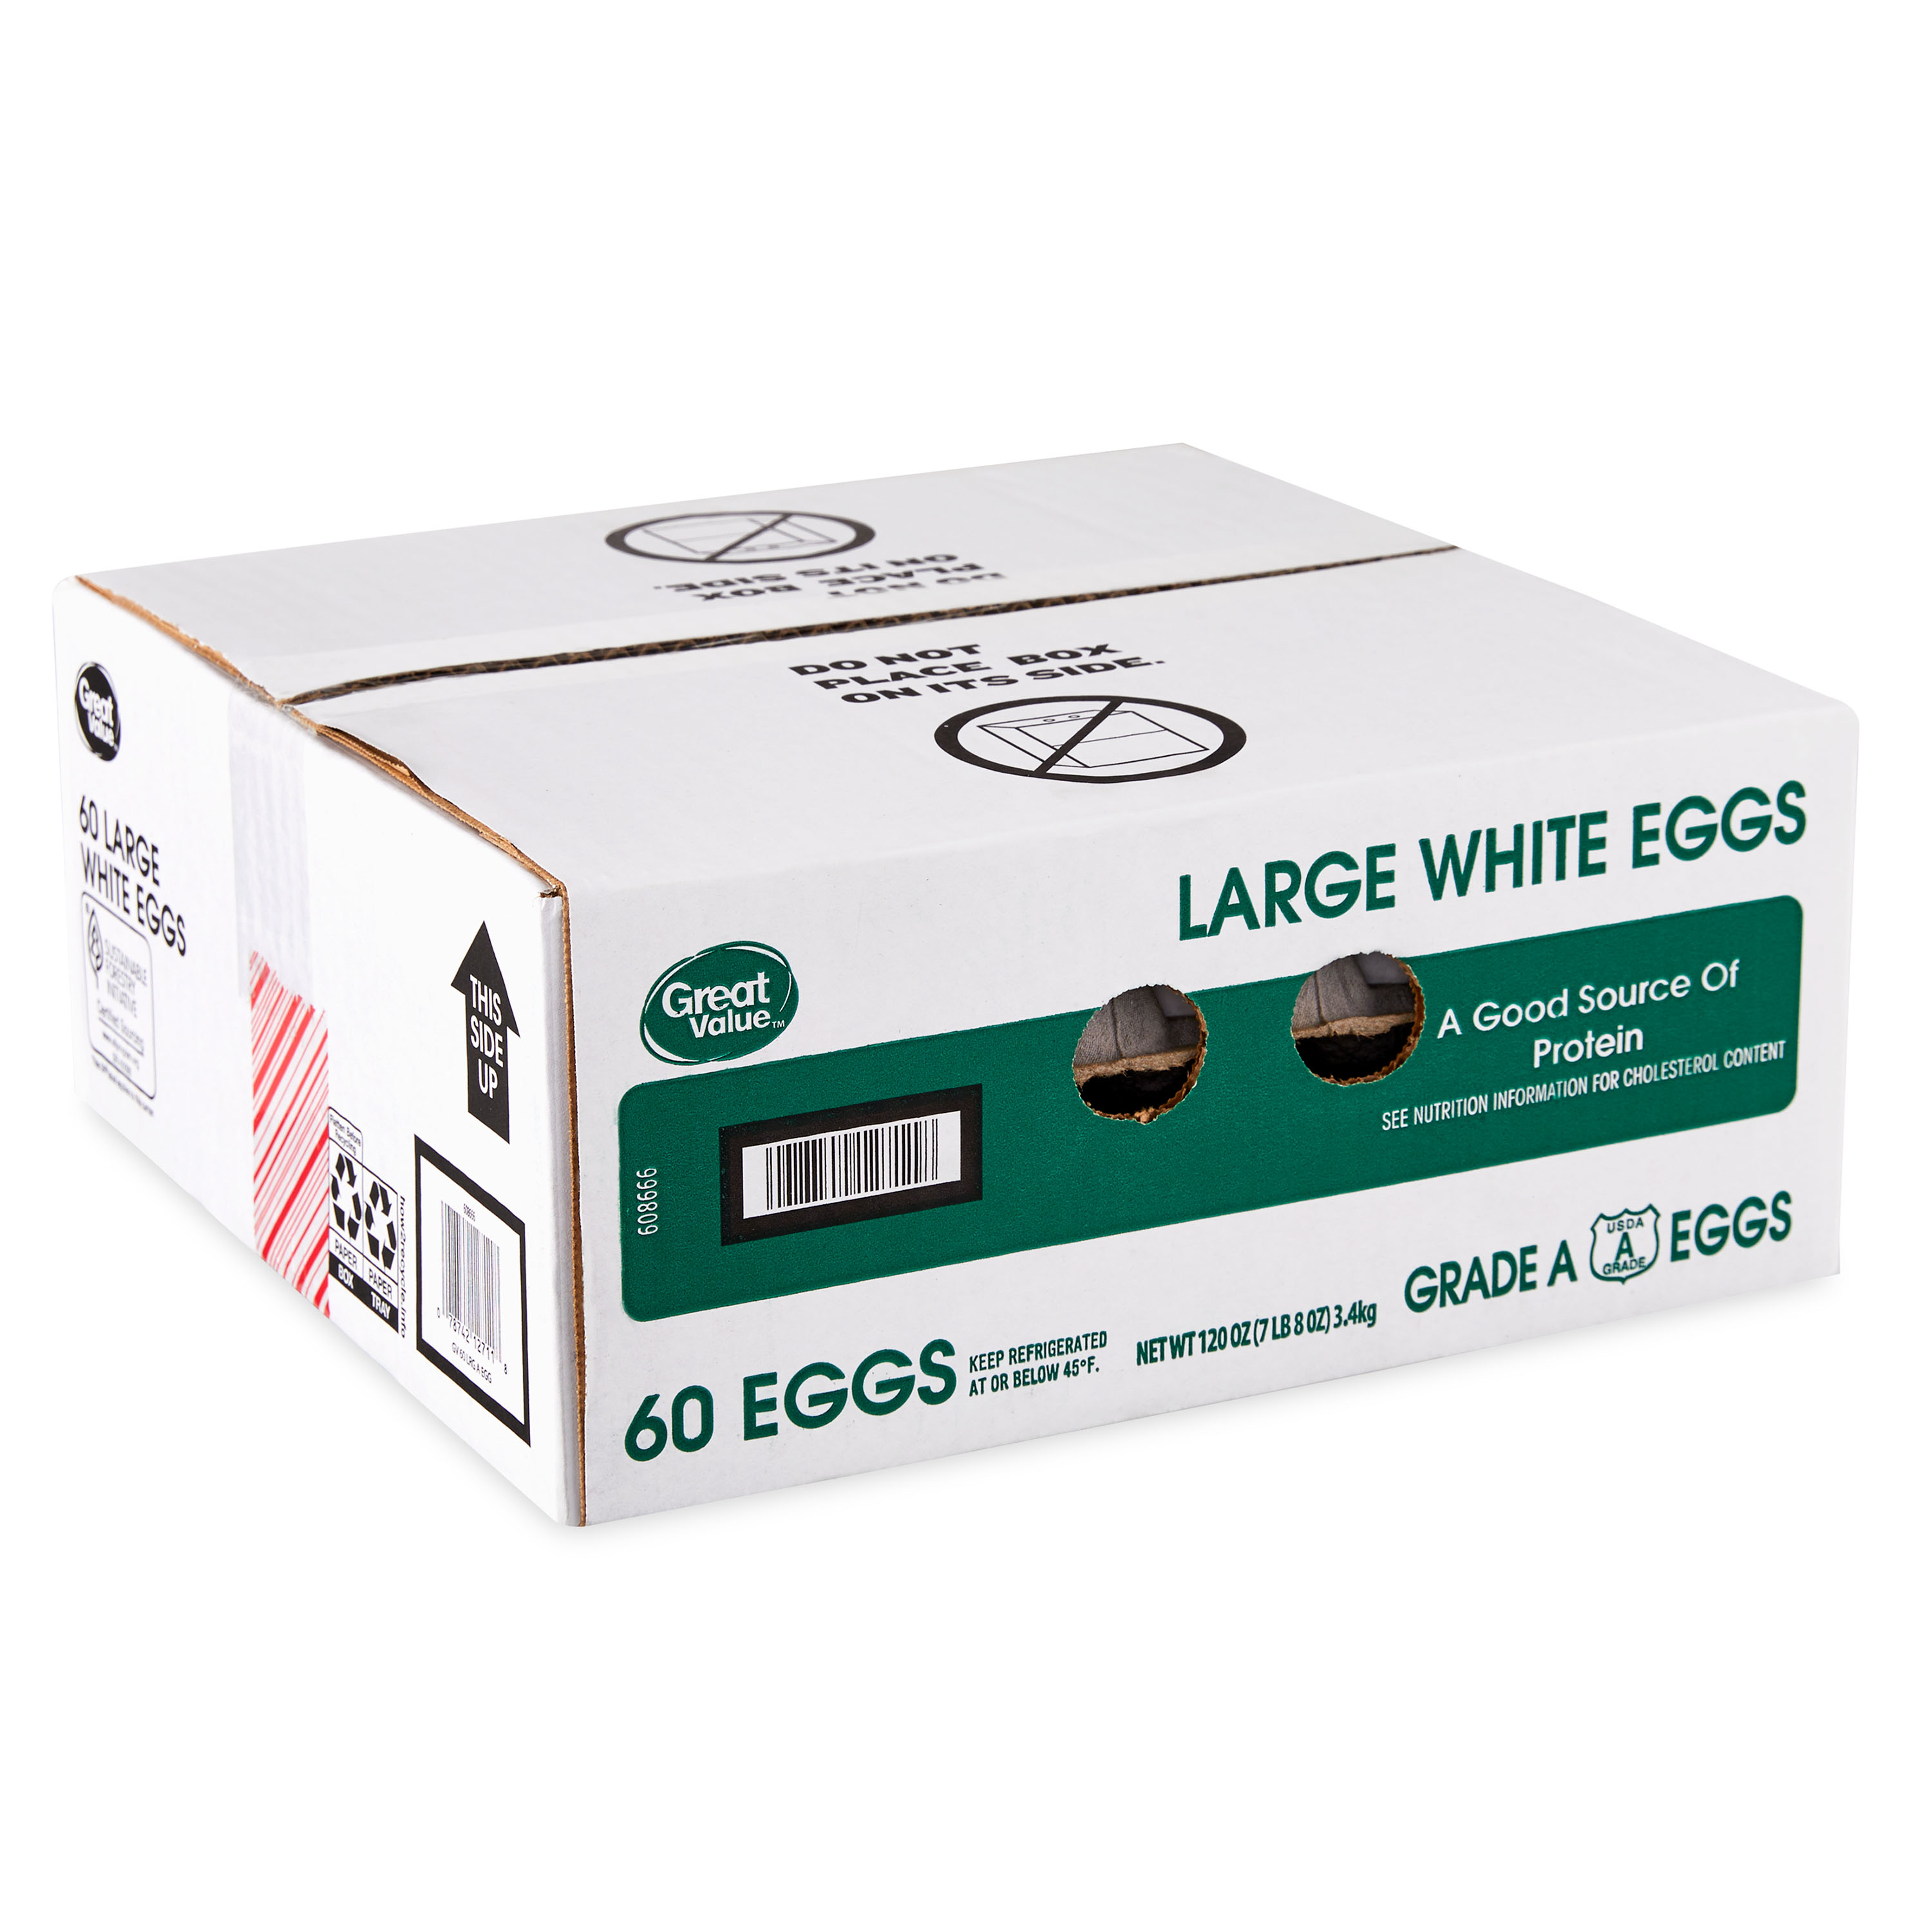 Great Value Large White Eggs, 60 Count - image 1 of 6